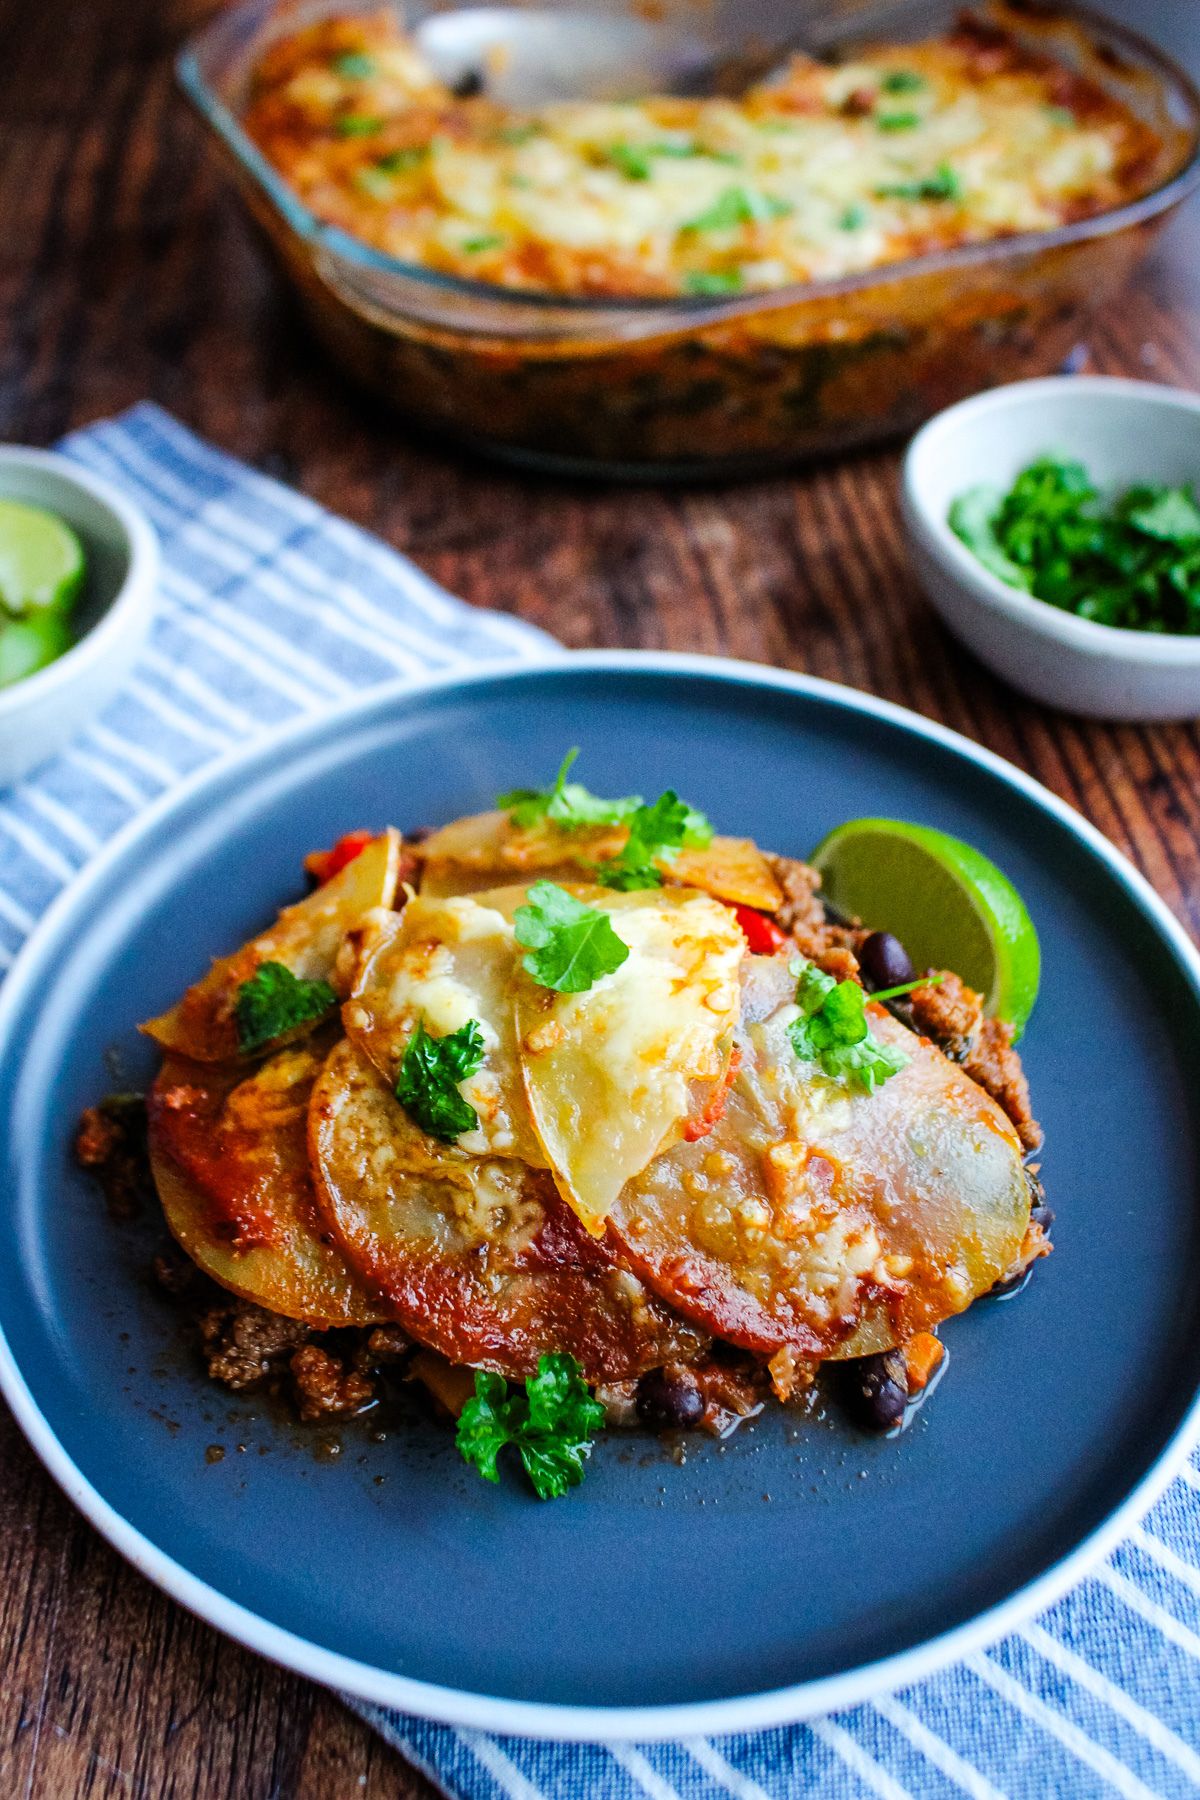 Taco potato bake served up on a plate with the casserole dish in the background.